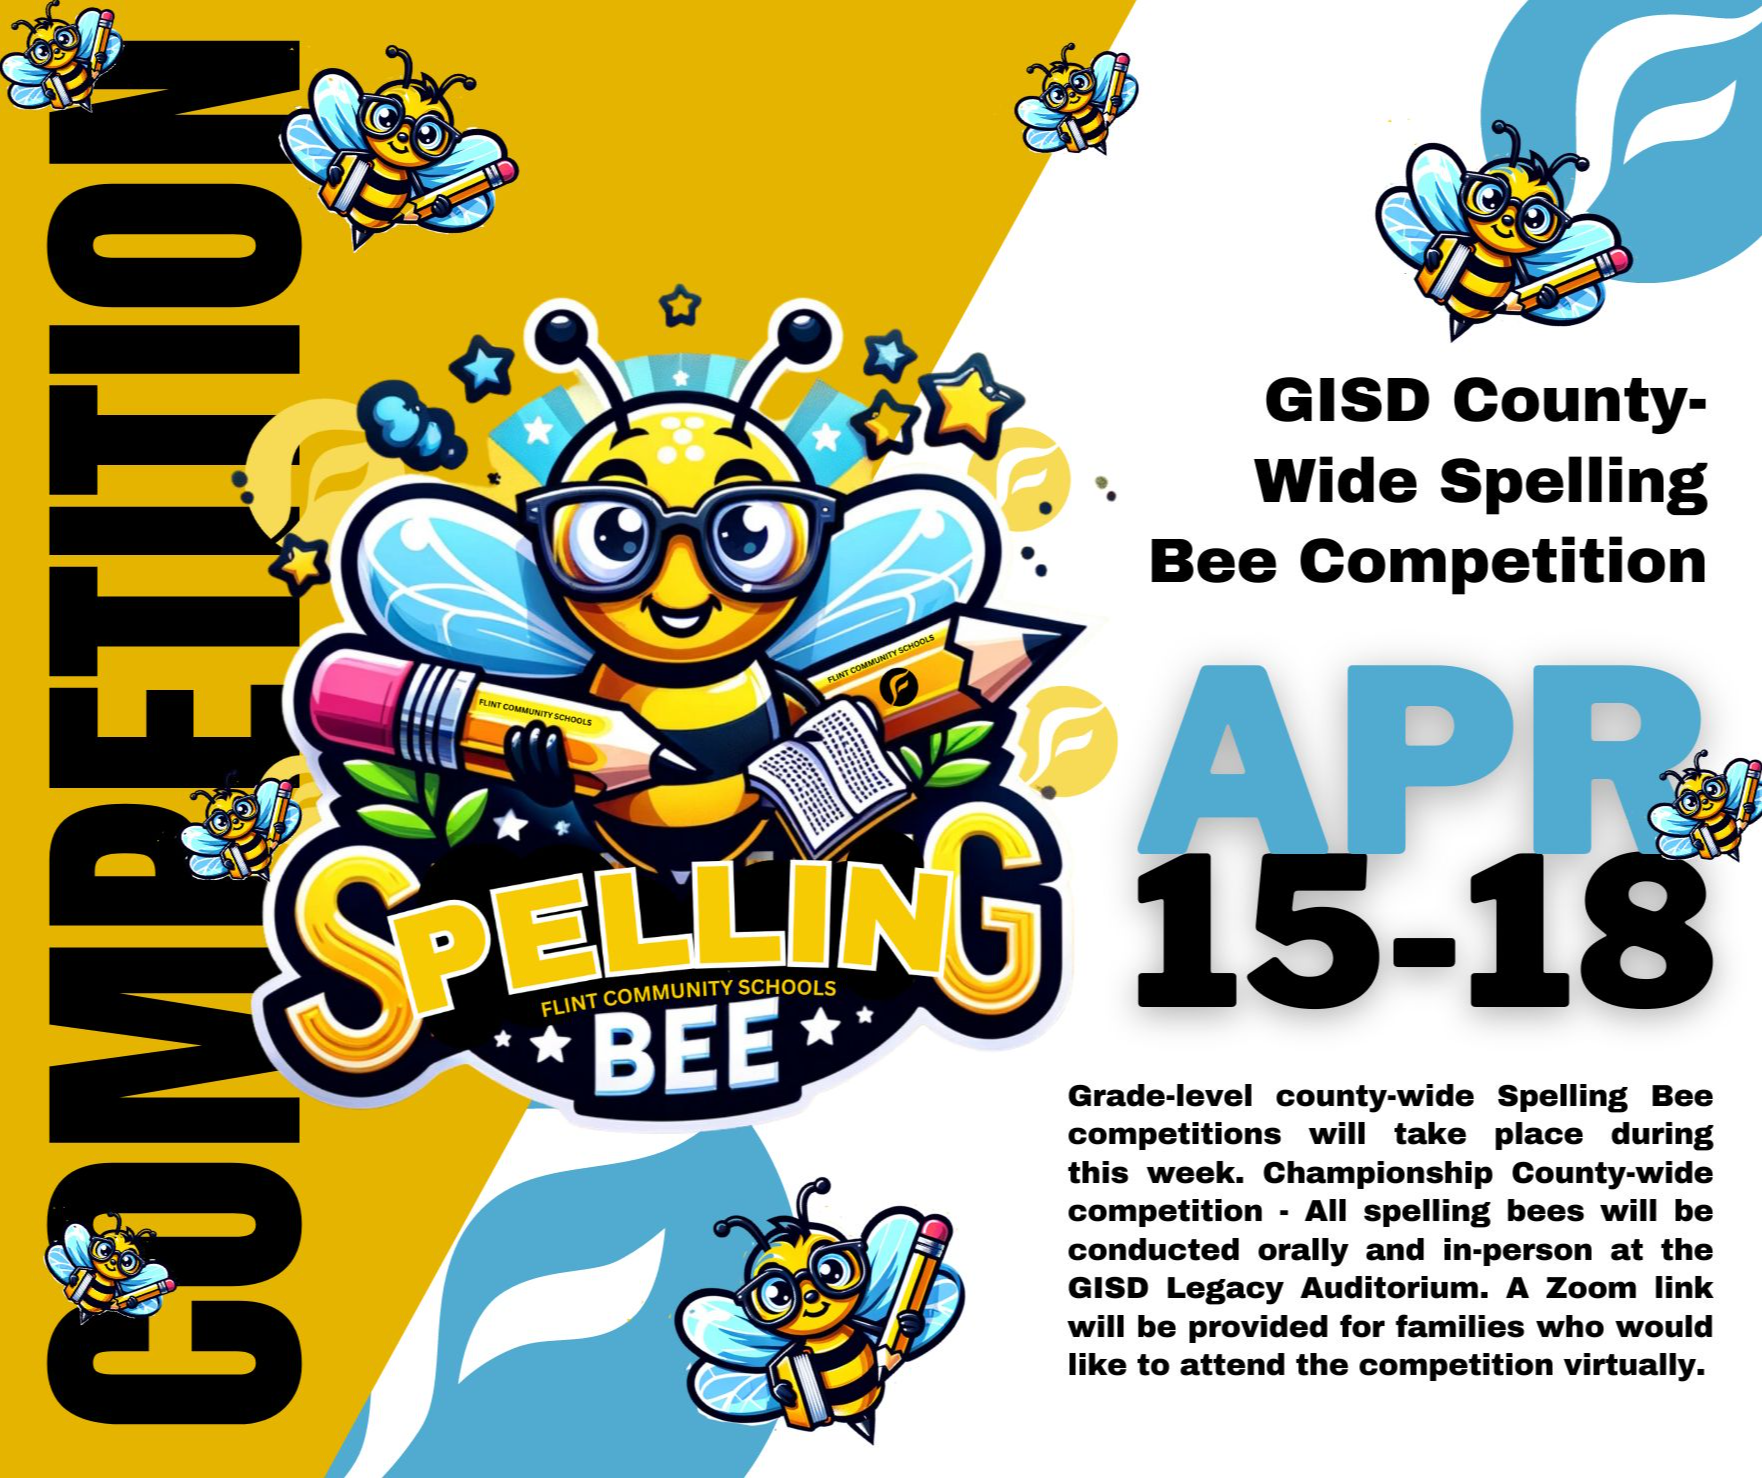 GISD County-wide Spelling Bee Competition